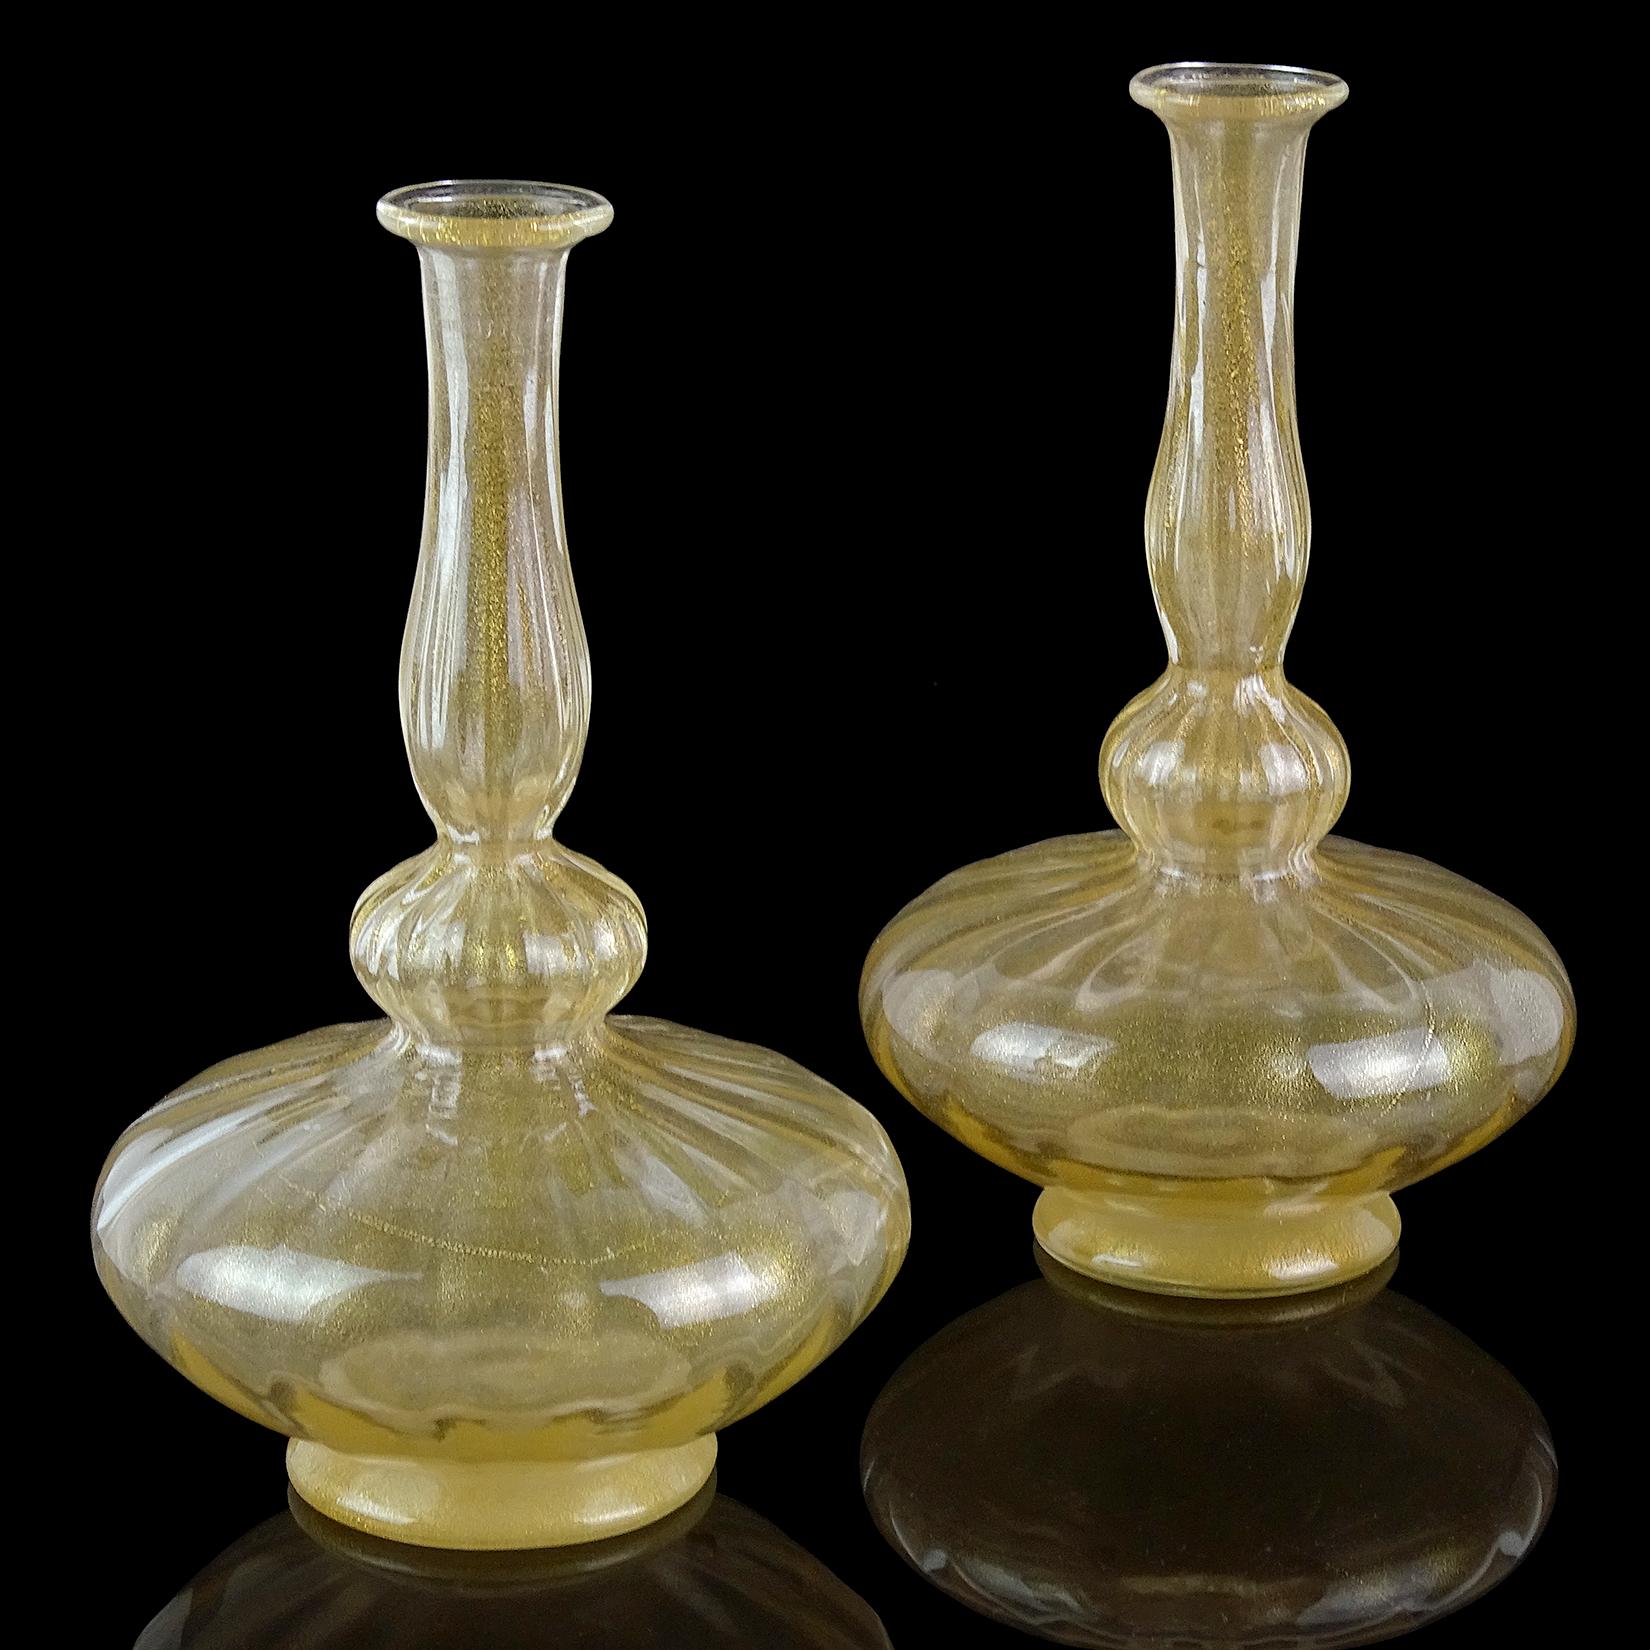 Beautiful set of 2 antique Venetian / early Murano hand blown gold leaf Italian art glass vases. They have a genie bottle shape, with pleated surface, and gold disks on the bottom. Created in the manner of the Seguso Vetri d'Arte and Salviati